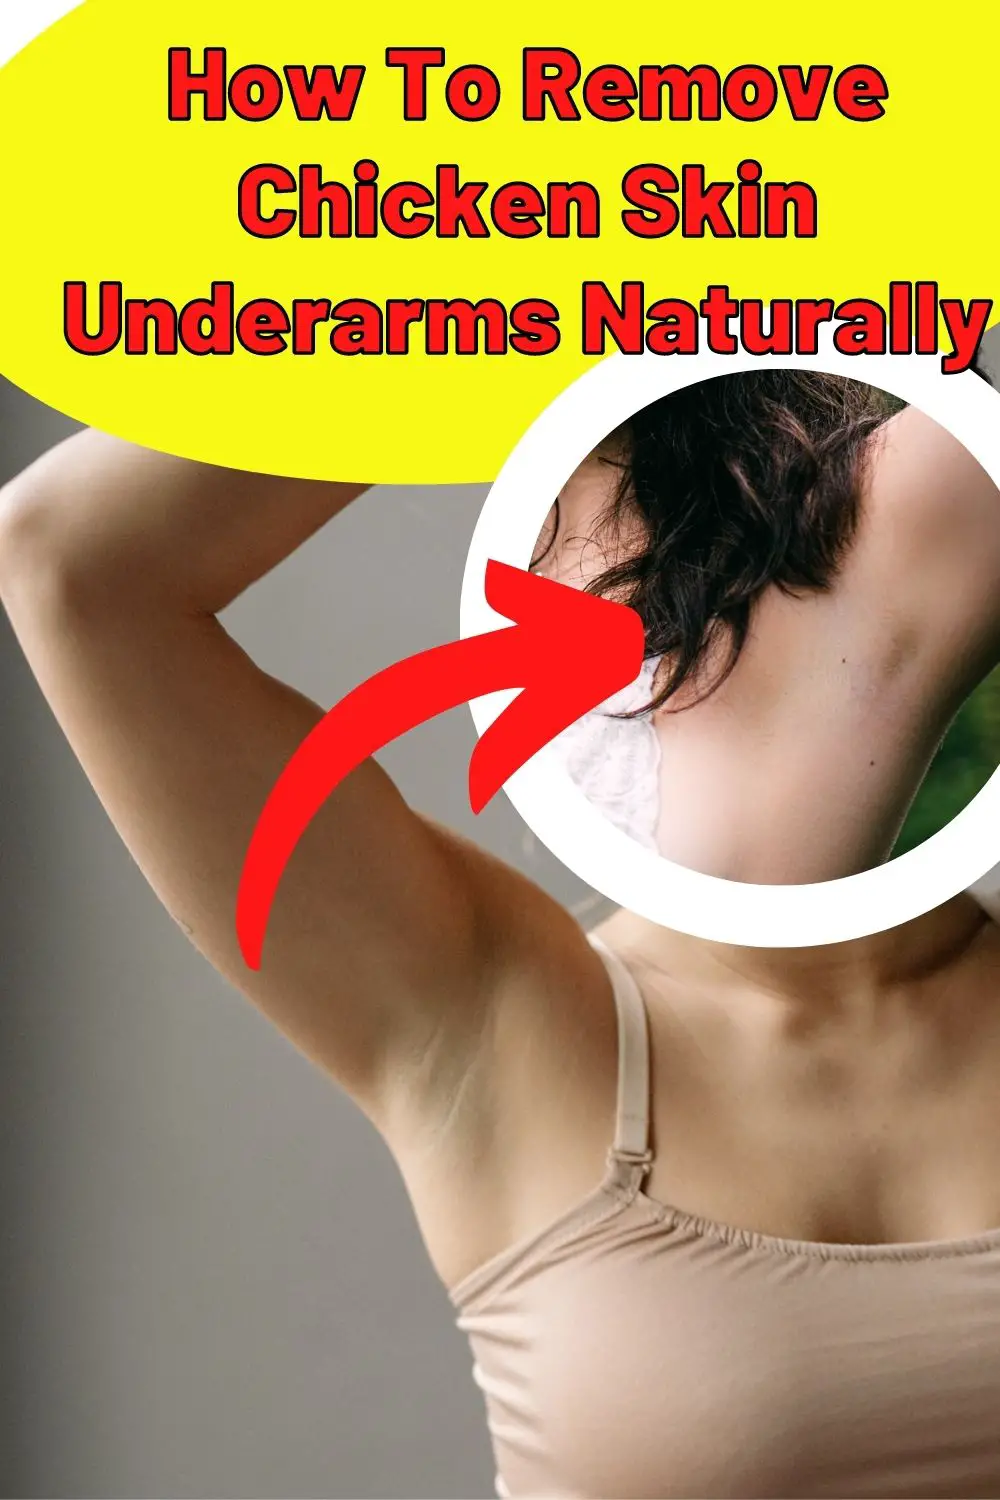 How To Remove Chicken Skin Underarms Naturally PIN